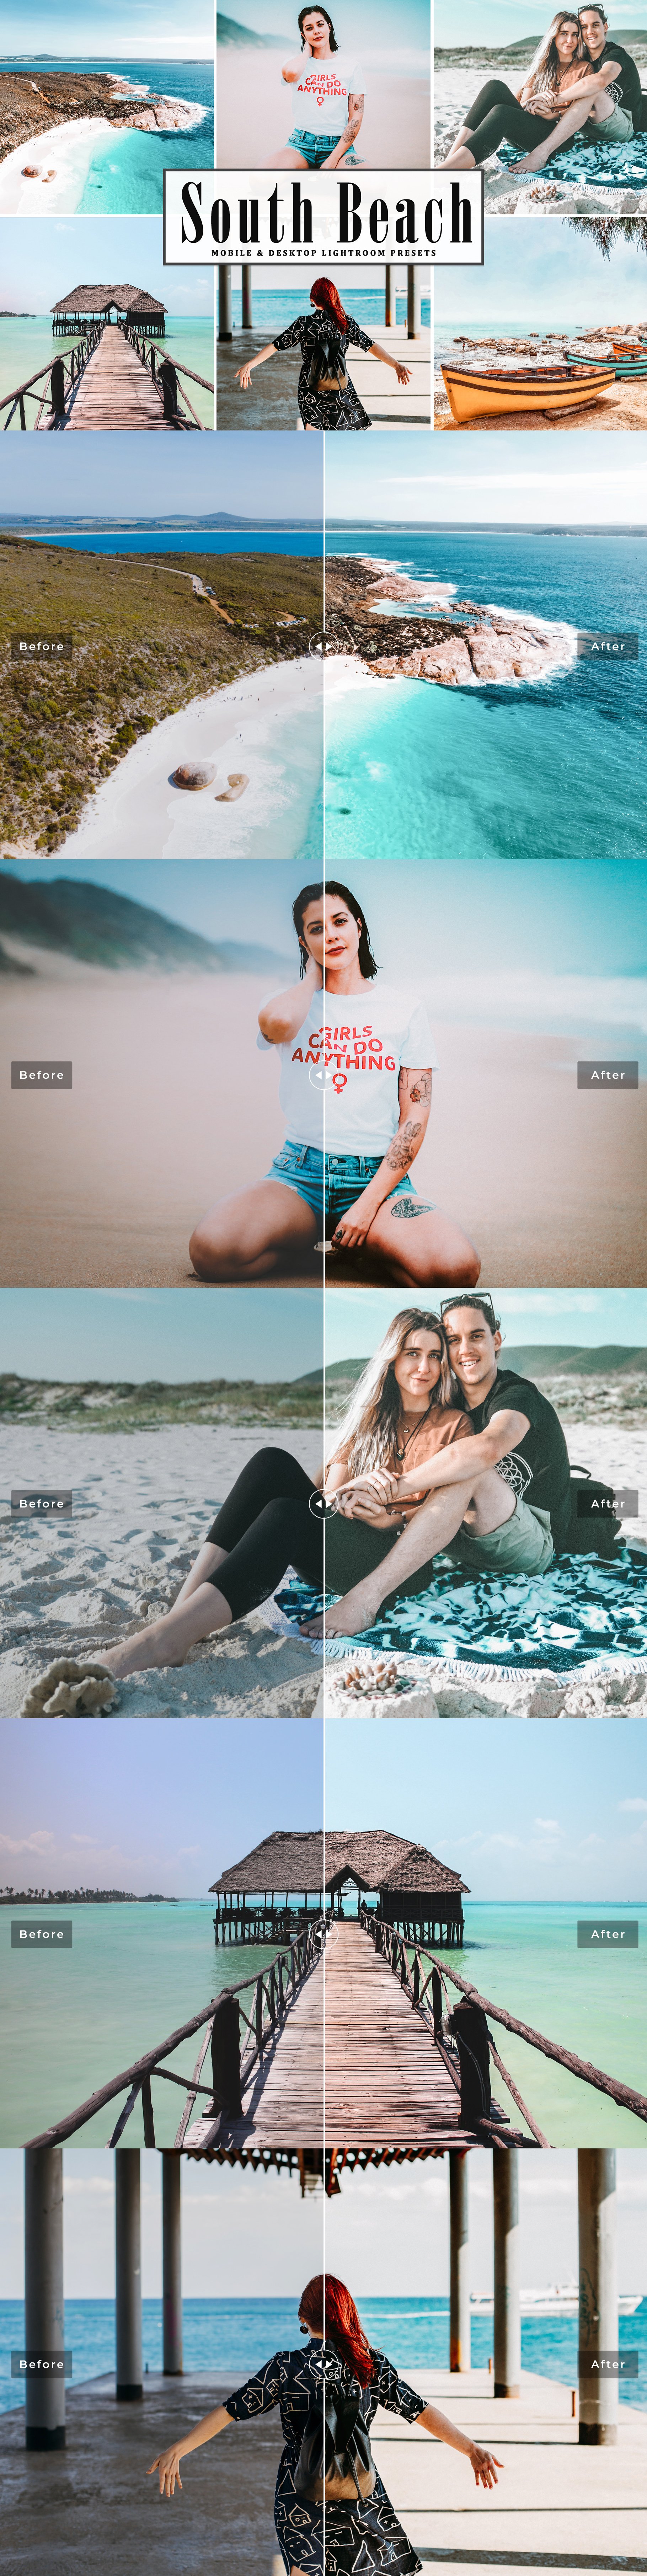 South Beach Lightroom Presets Packcover image.